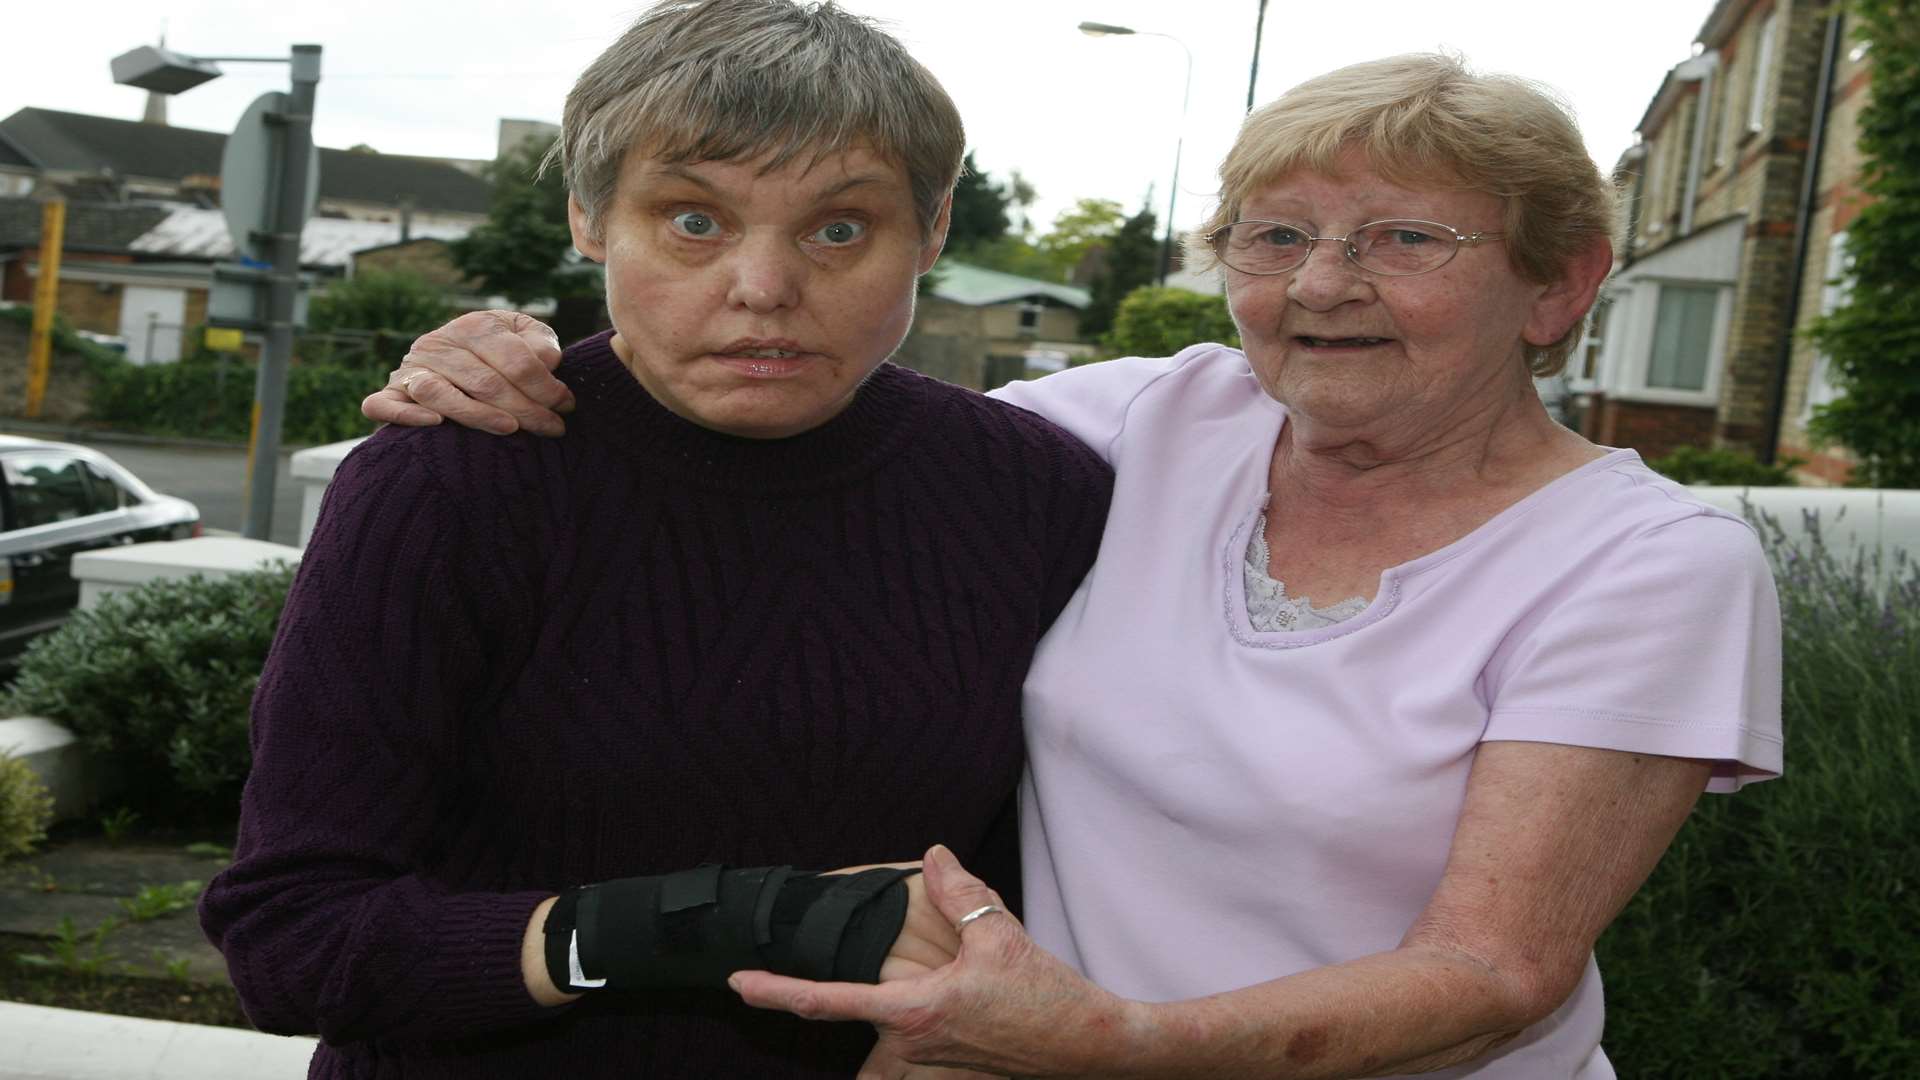 Julia Knight, pictured with mum Edna Woolfries, broke three fingers and suffered a suspected broken wrist after falling from the kerb in the town centre